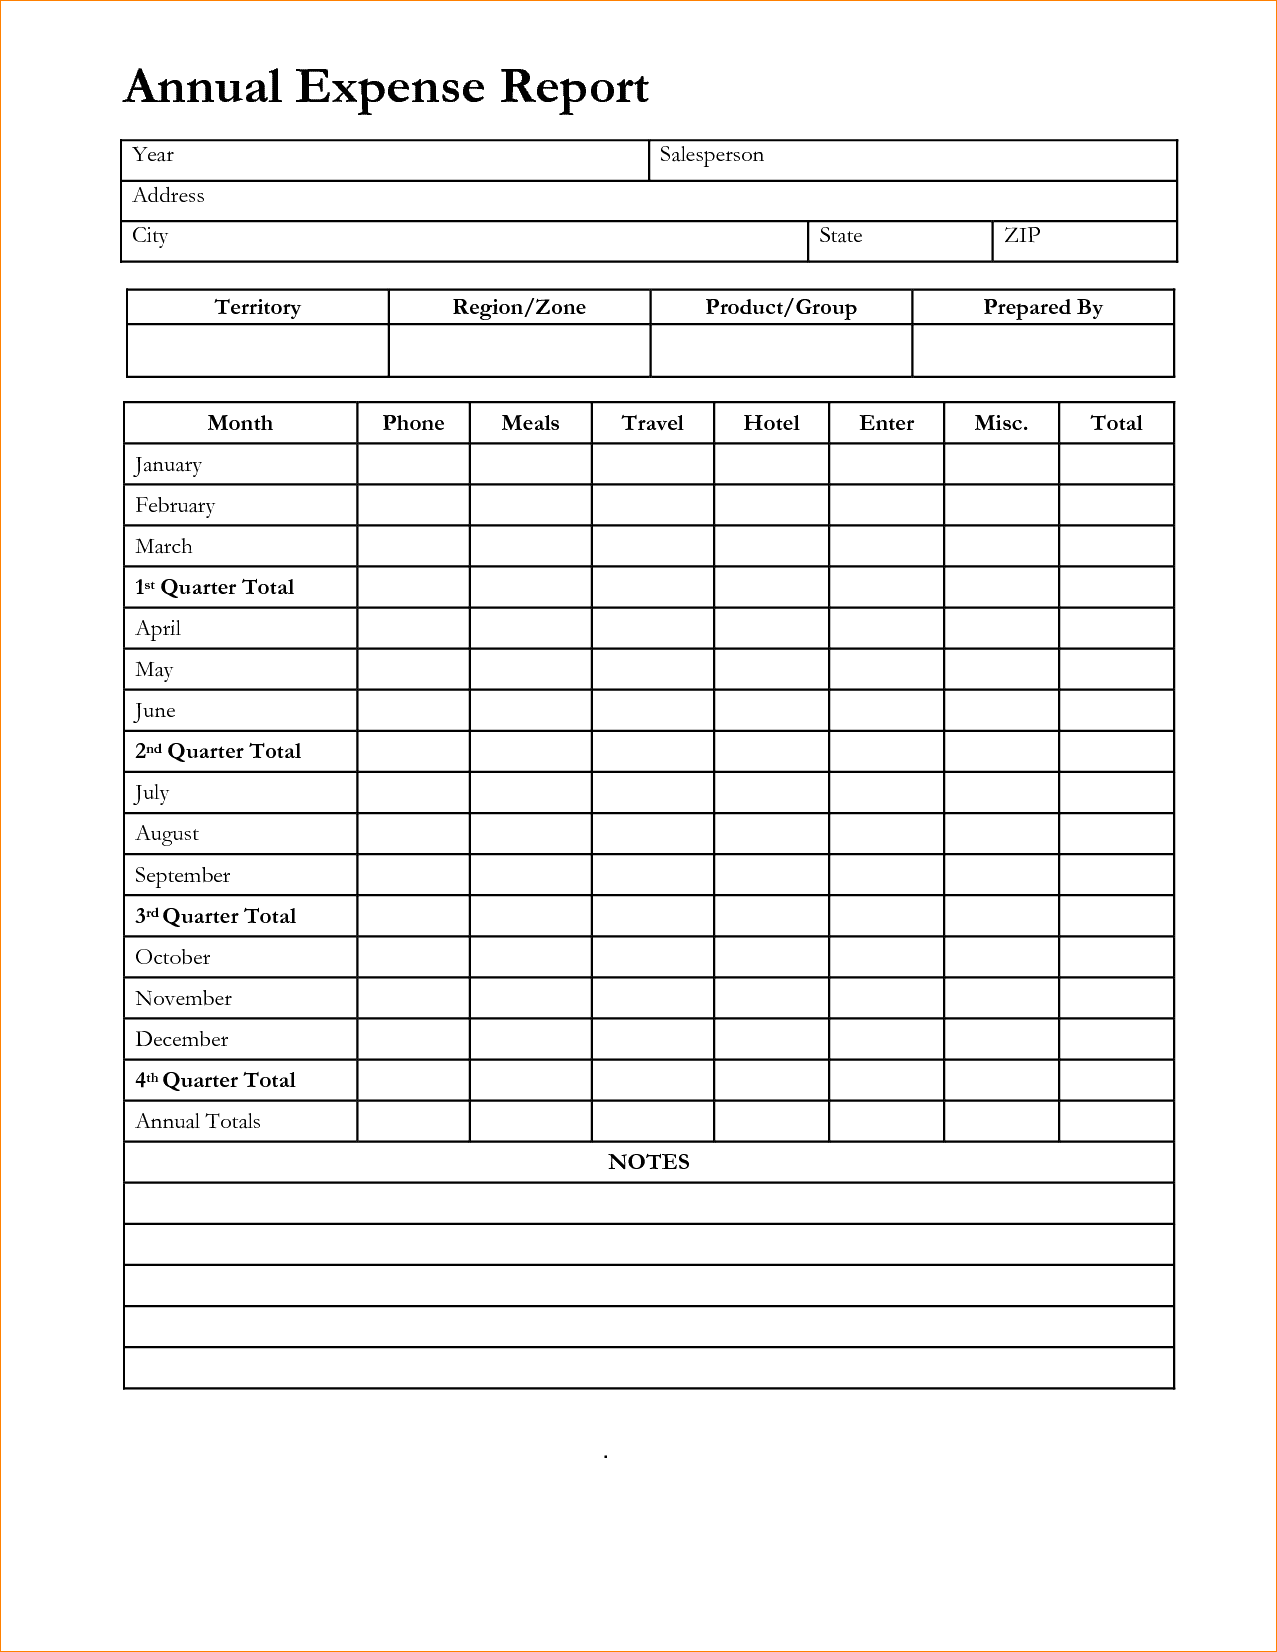 yearly-expense-report-template-spreadsheet-templates-for-busines